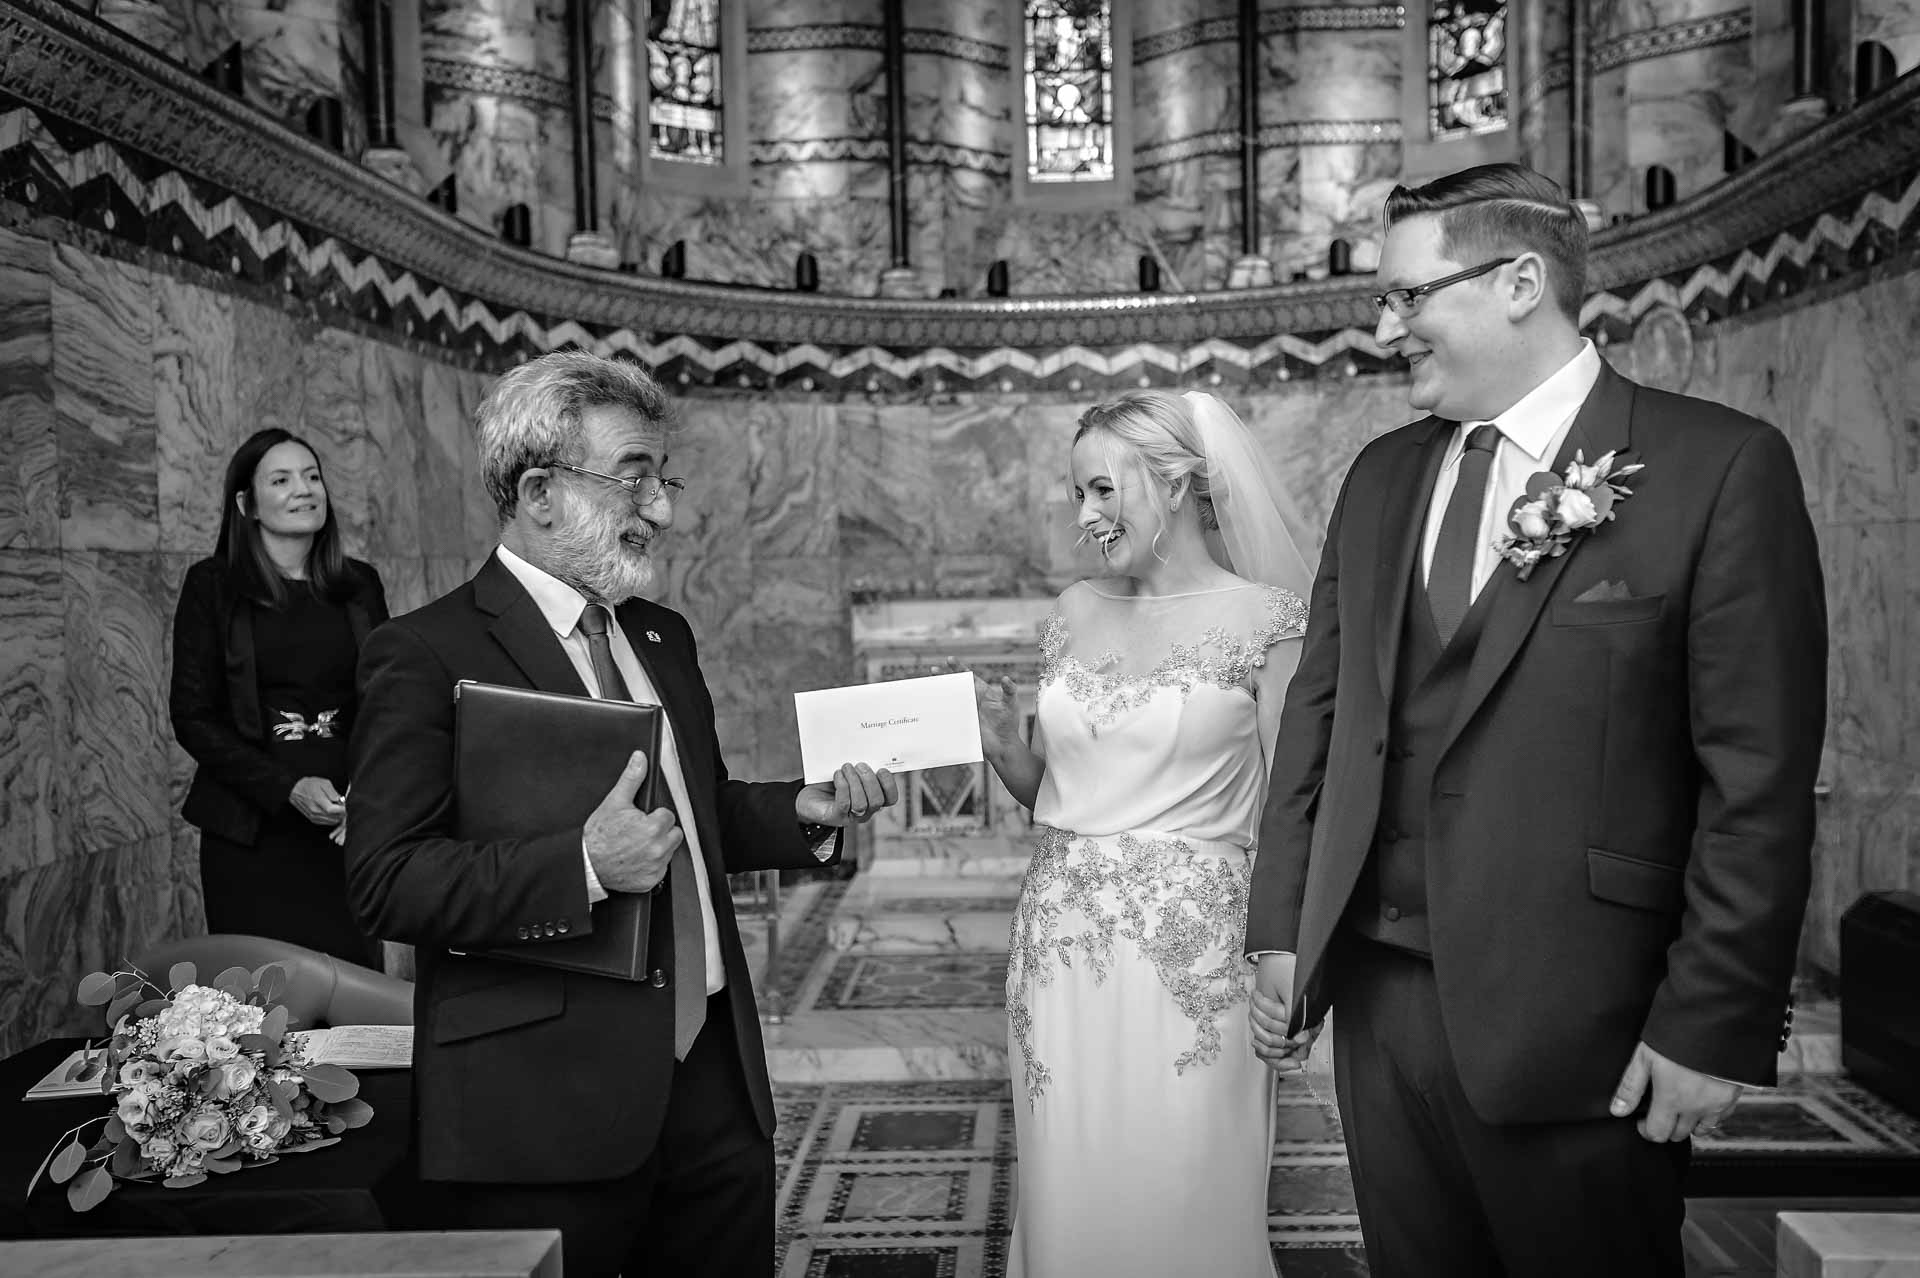 Registrar presenting marriage certificate to newly-wedded couple - black and white photograph